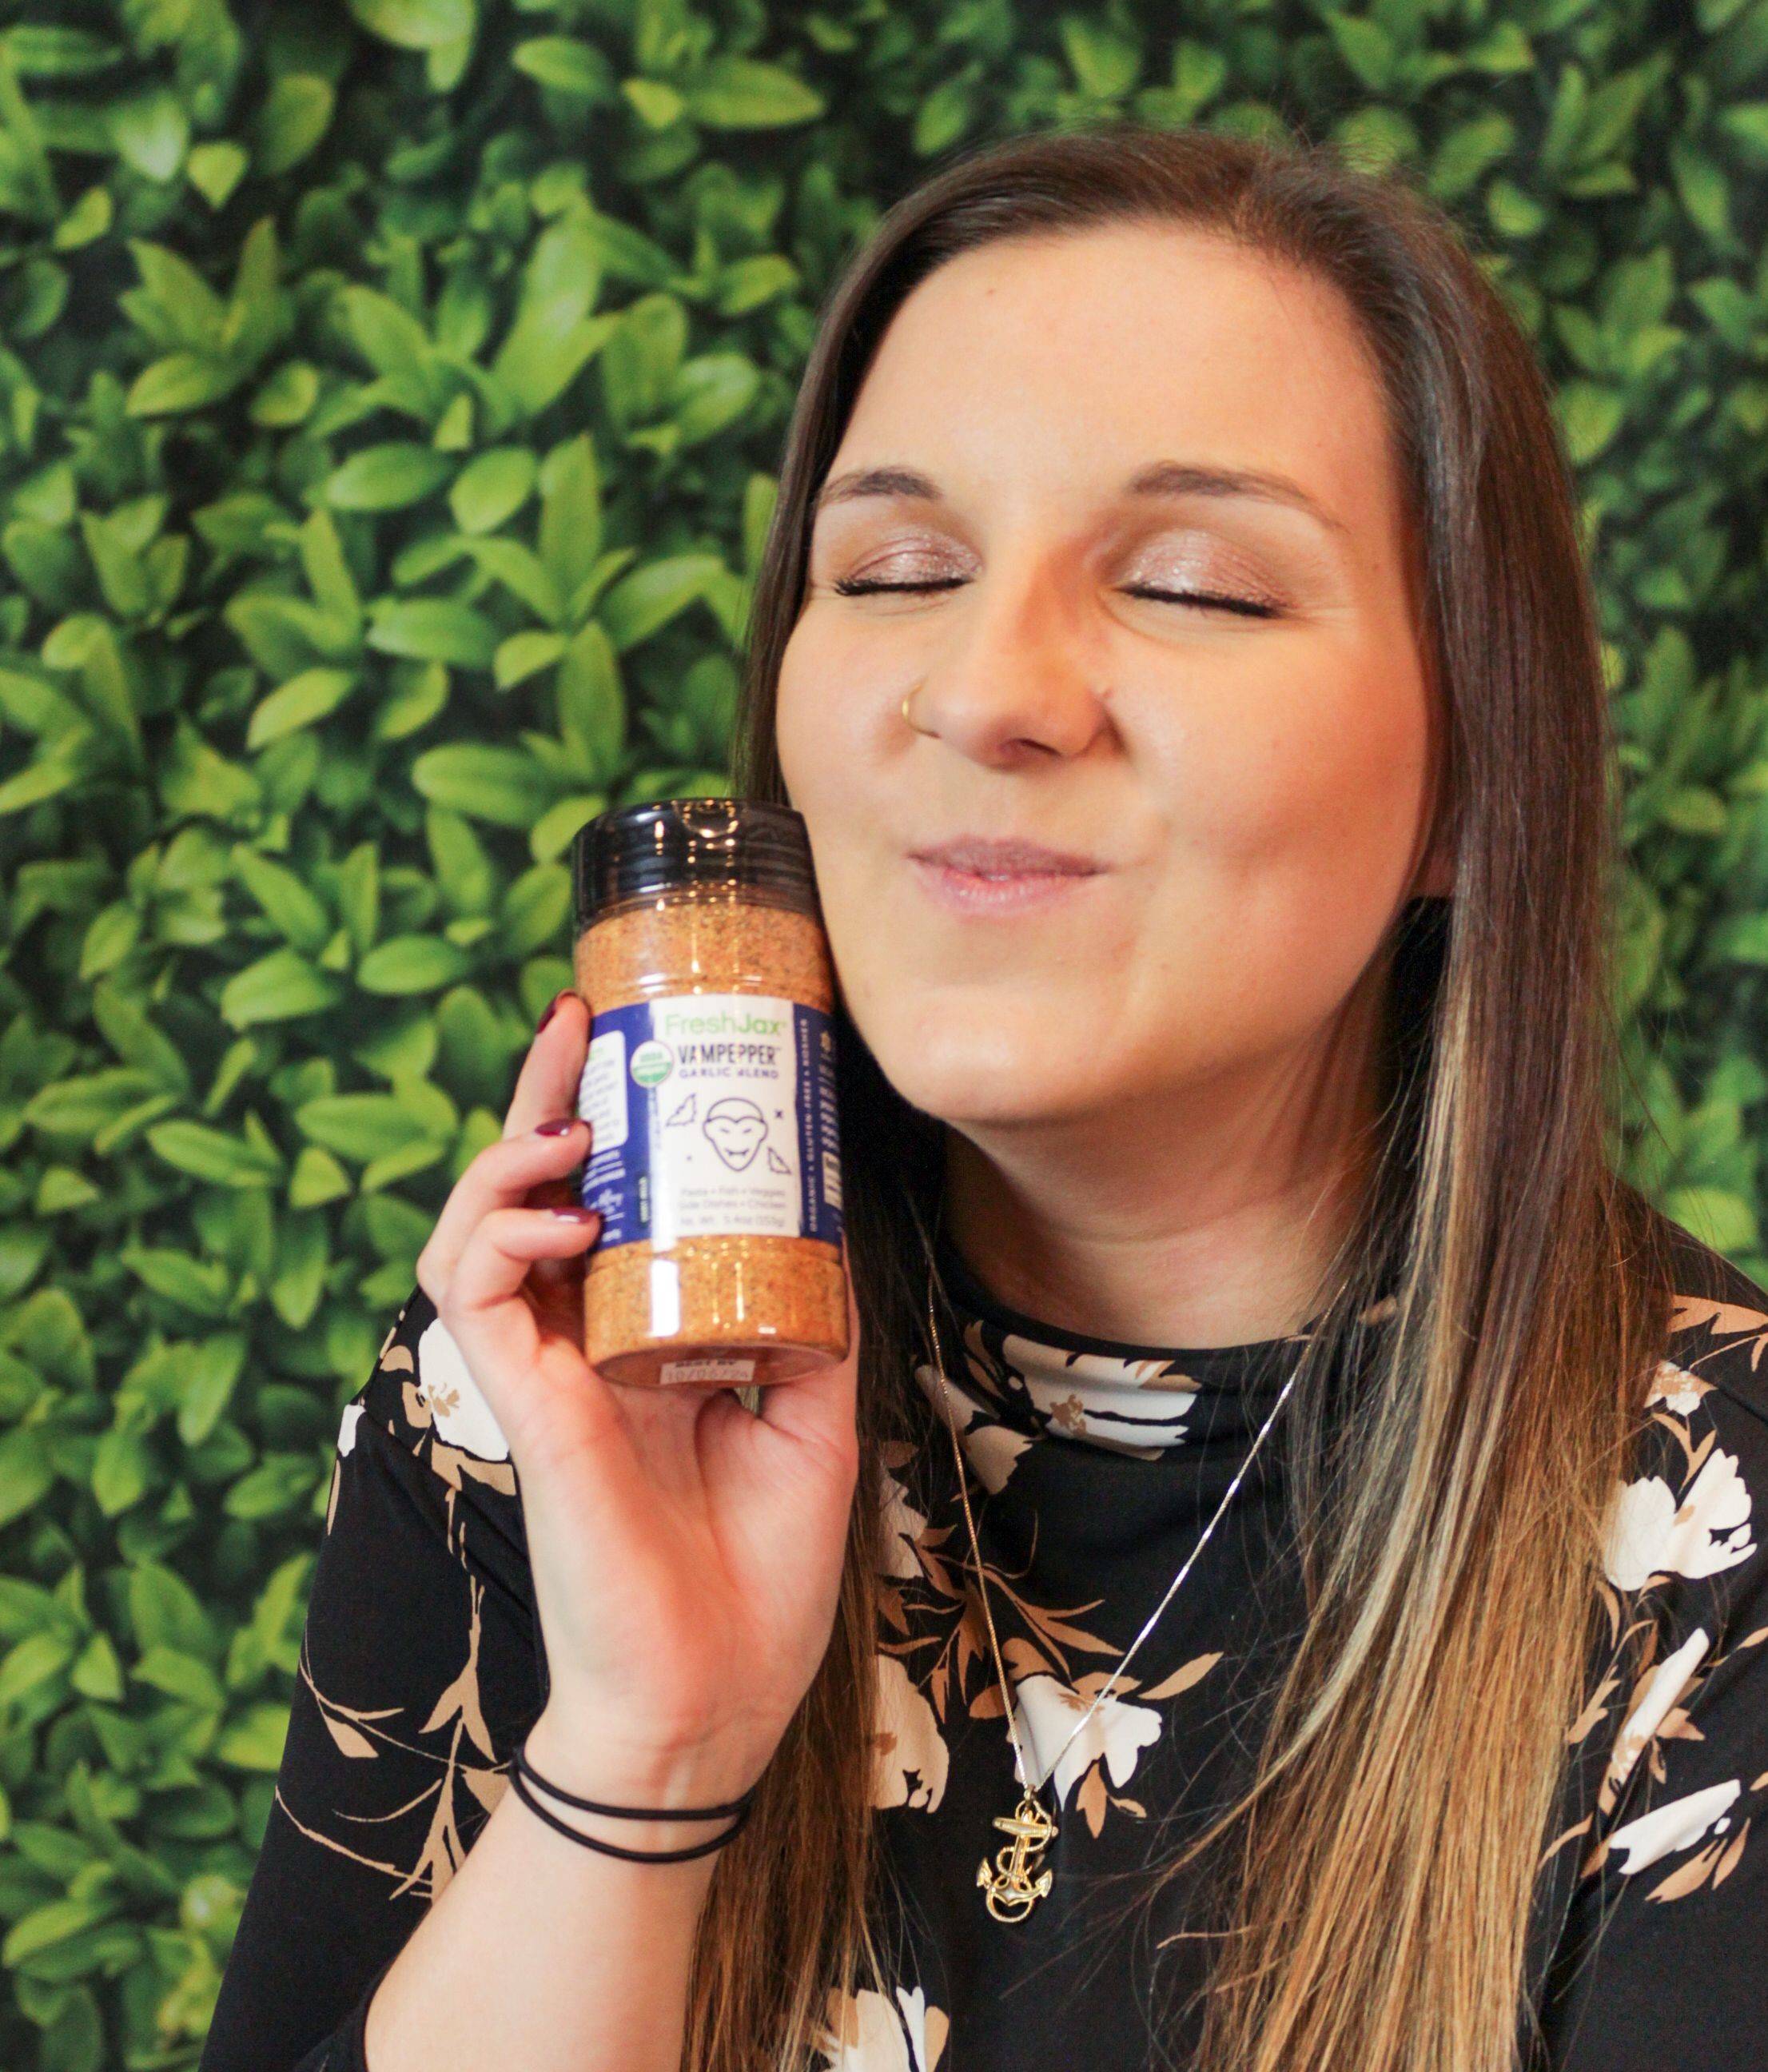 Paige with spice bottle